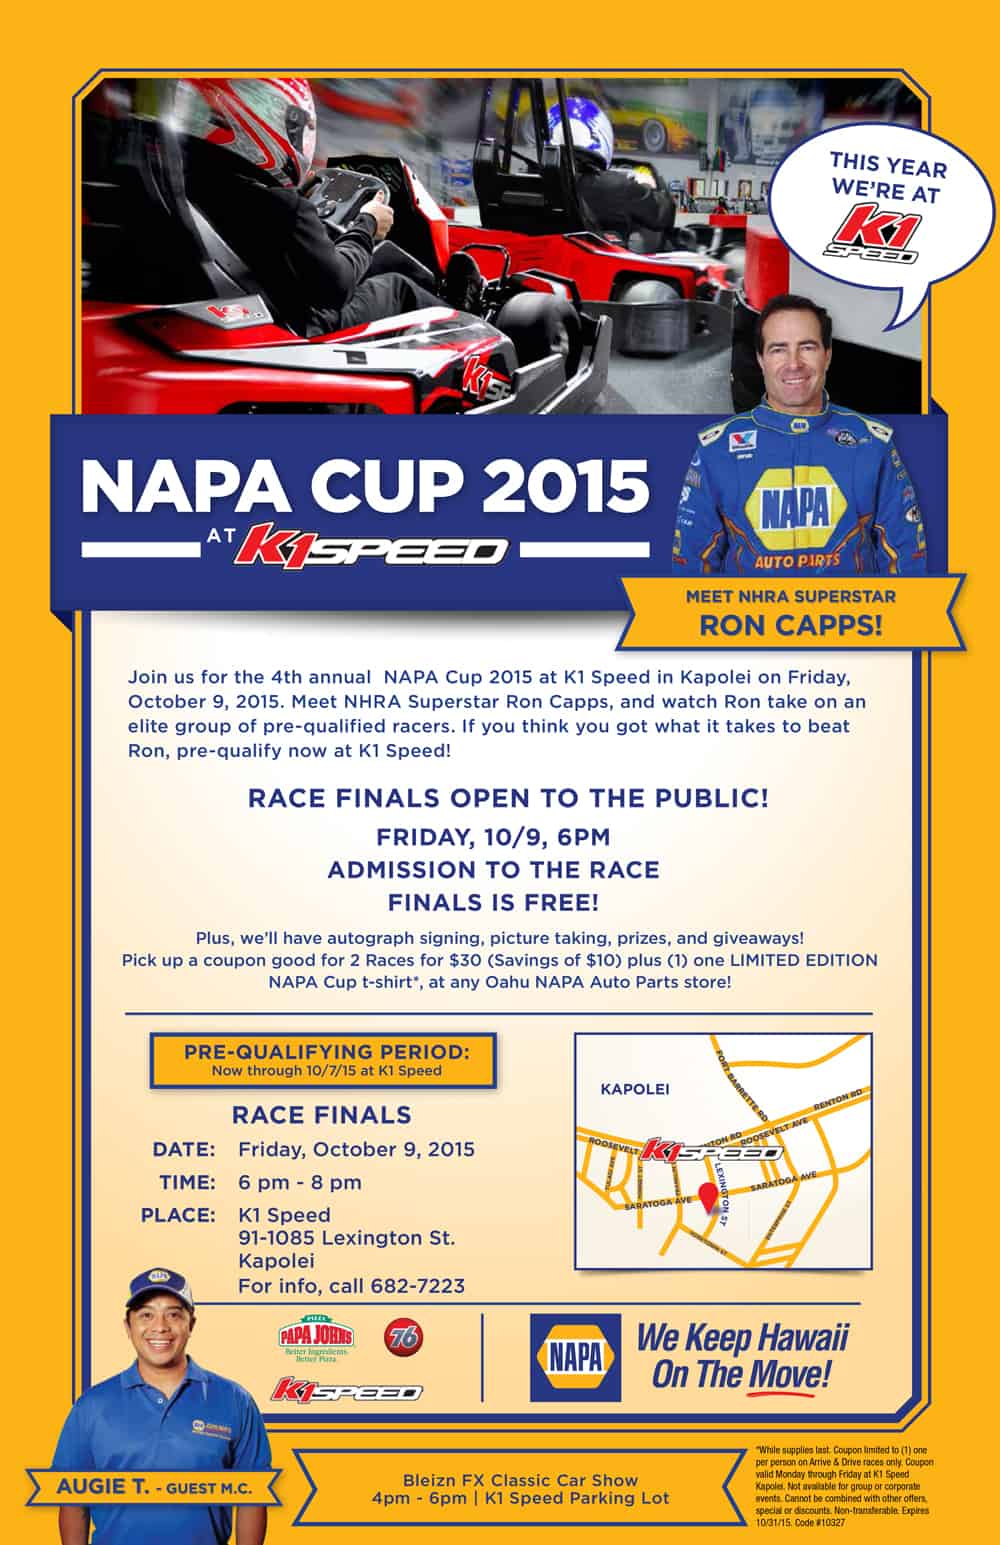 NAPA15-310_AUG-NAPA-Cup-Poster-Update-2015-proof02